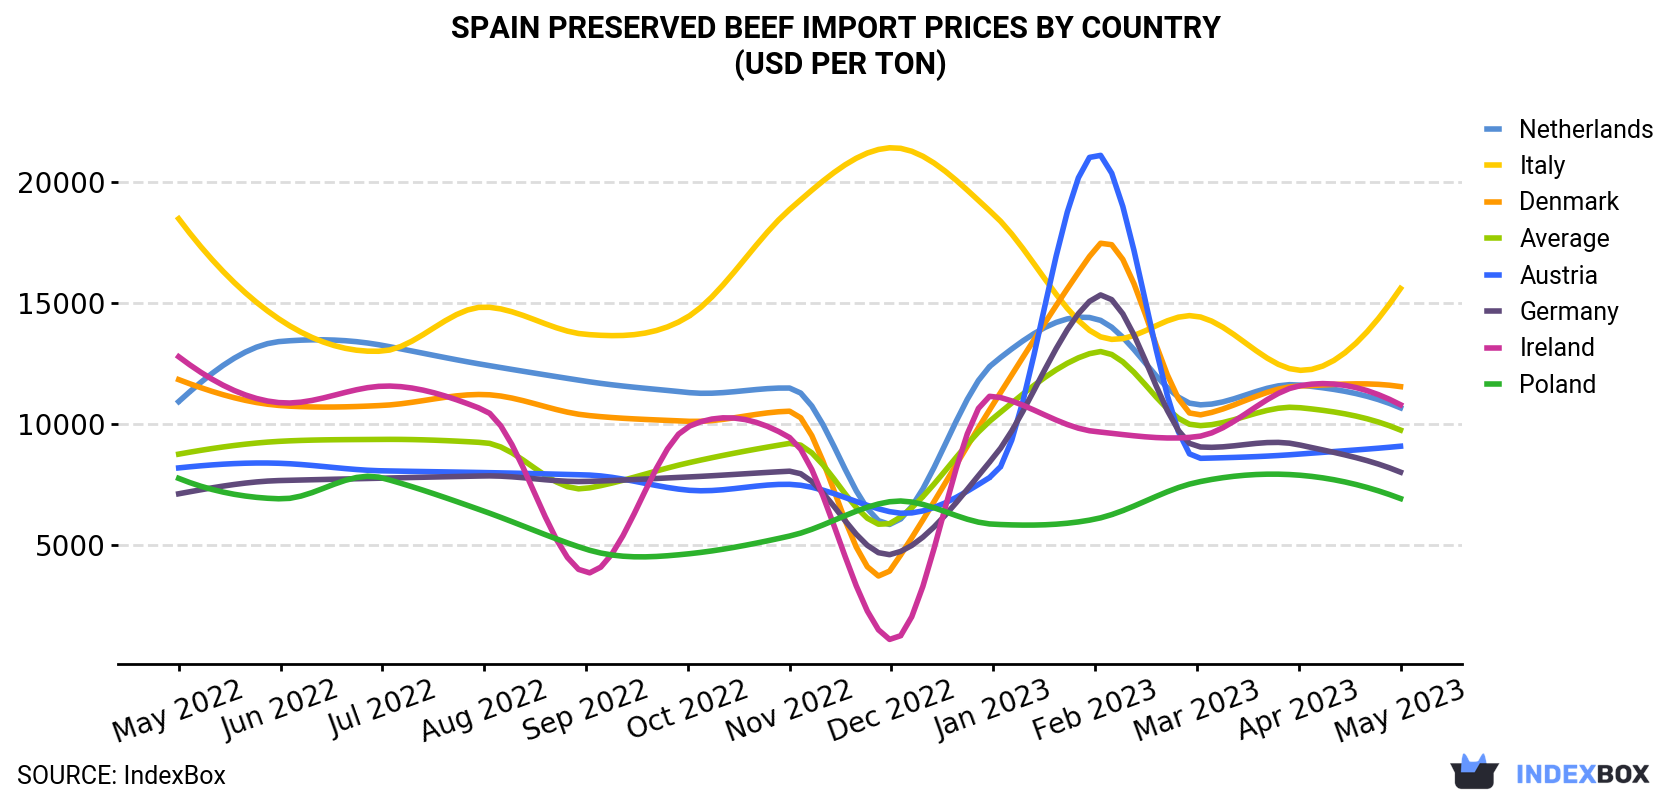 Spain Preserved Beef Import Prices By Country (USD Per Ton)